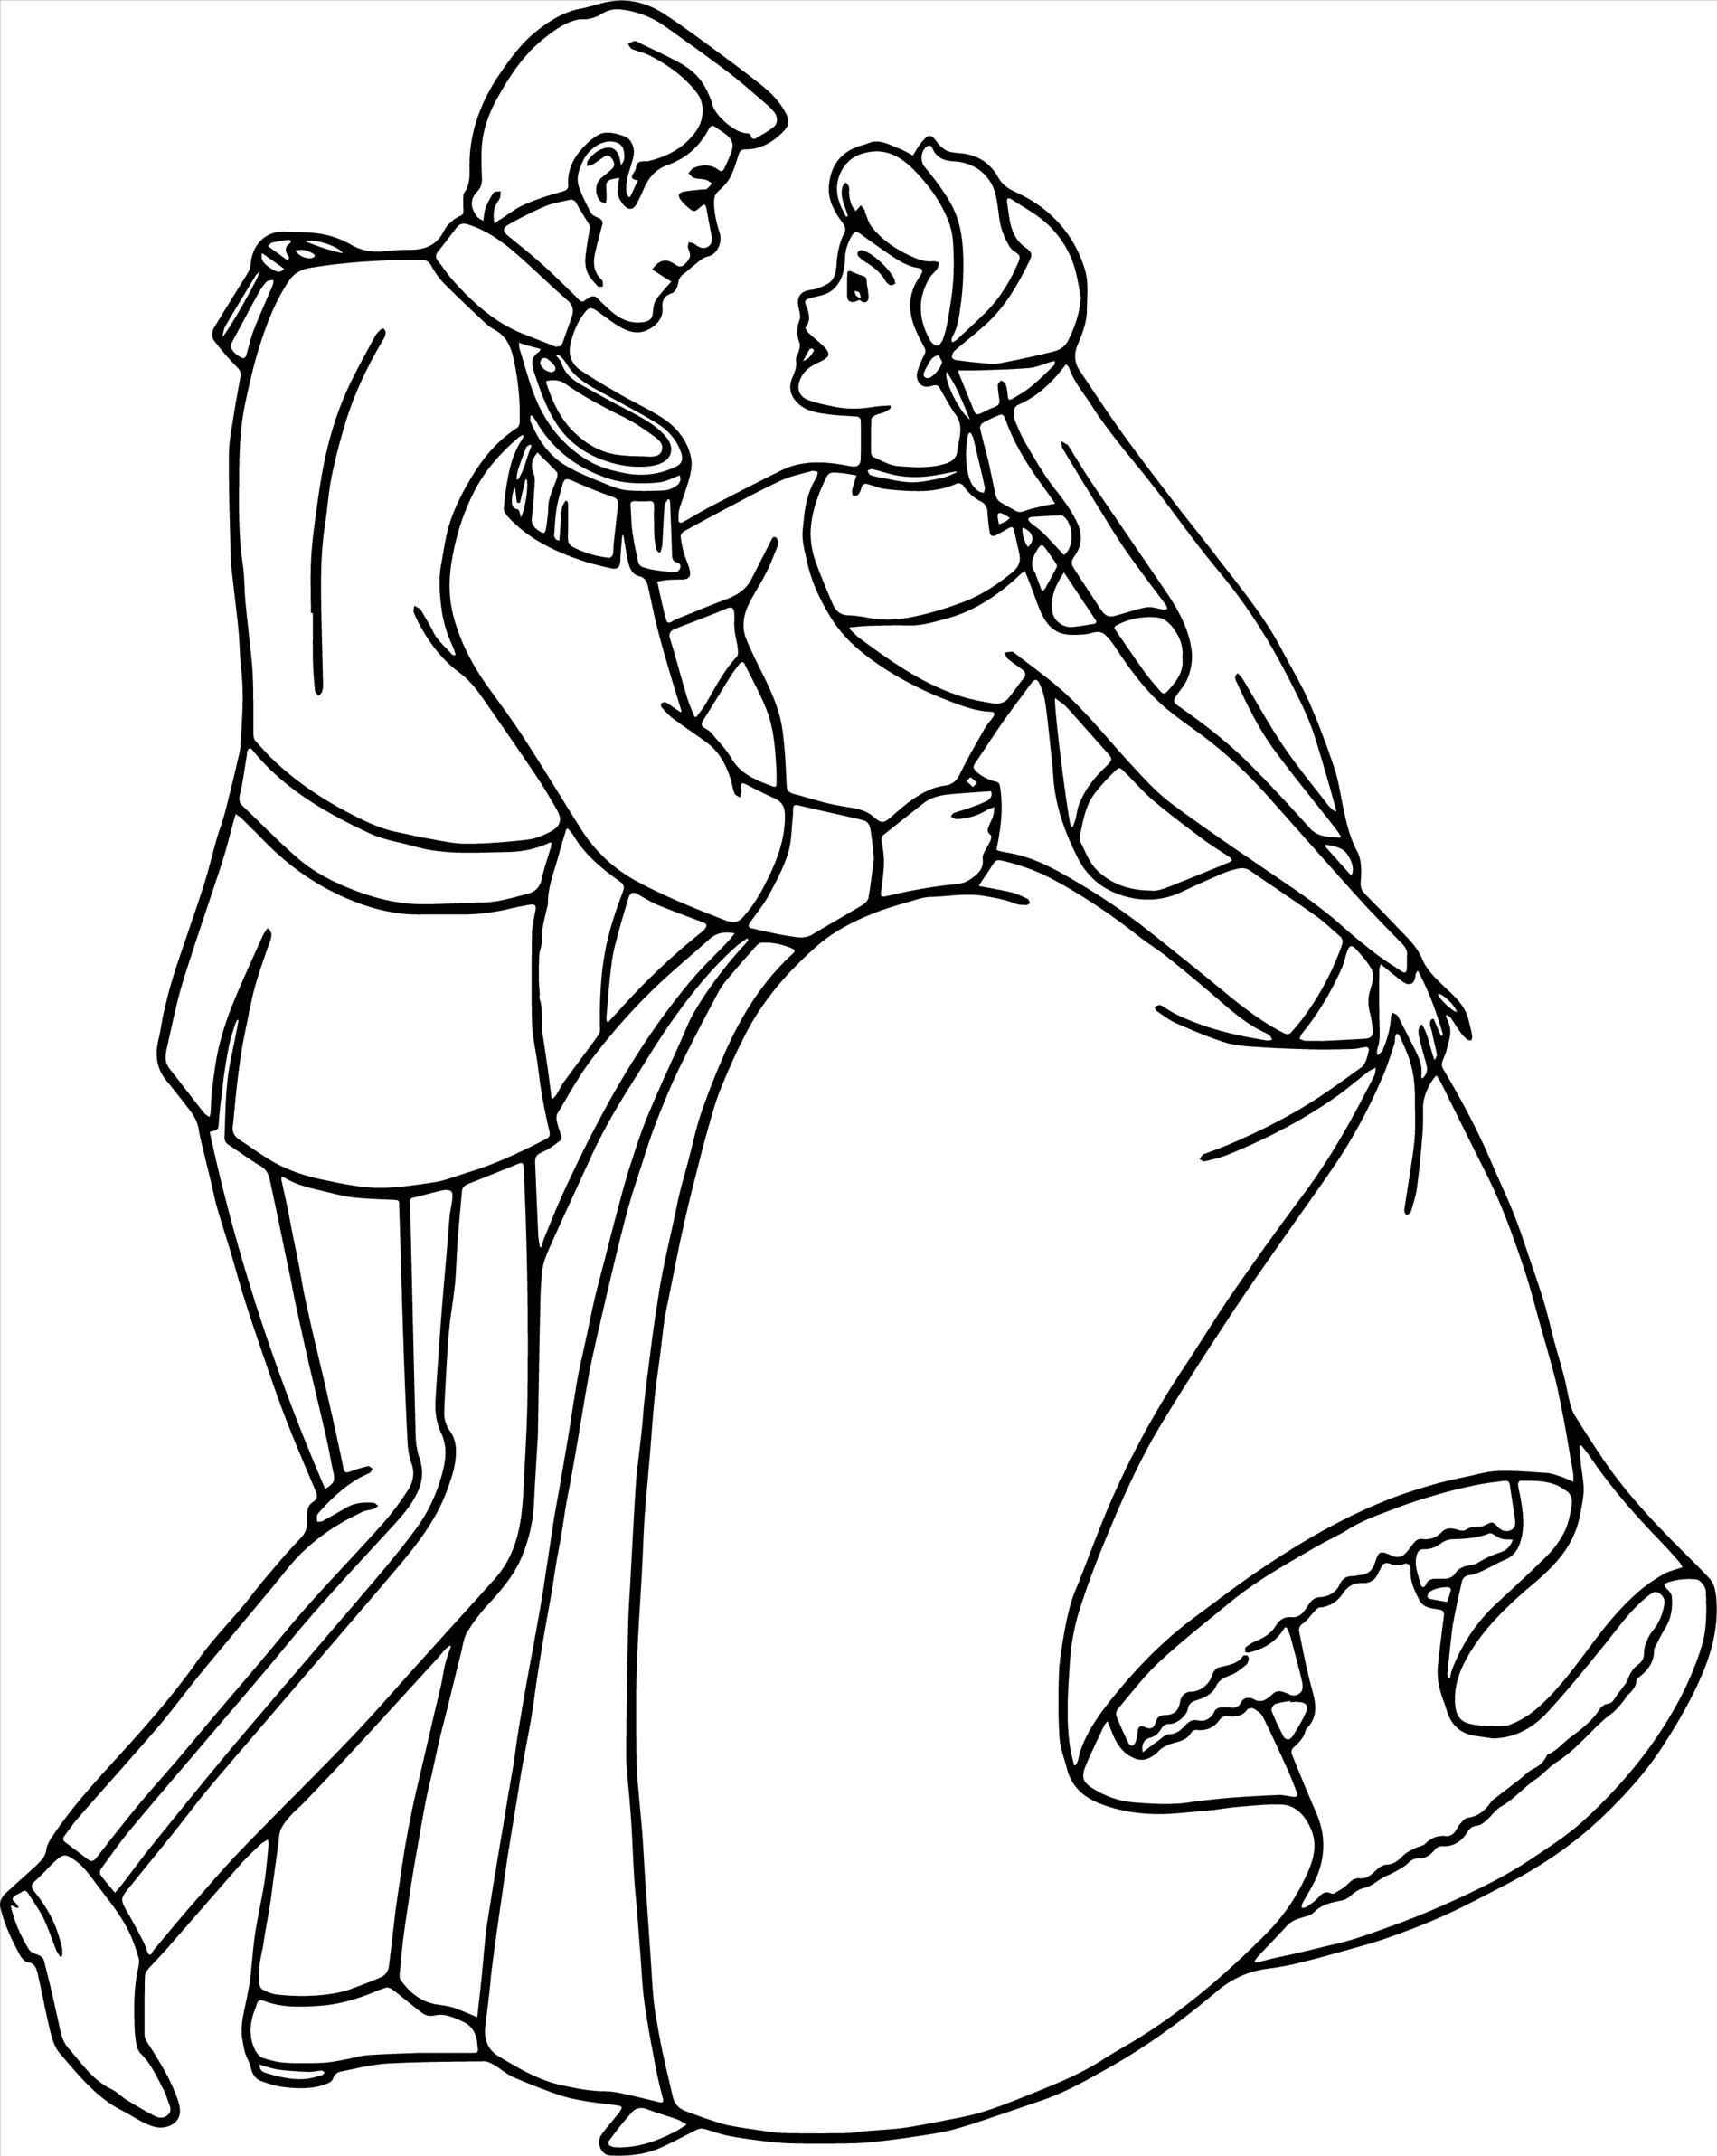 Cinderella Face Coloring Pages at GetColorings.com | Free ...